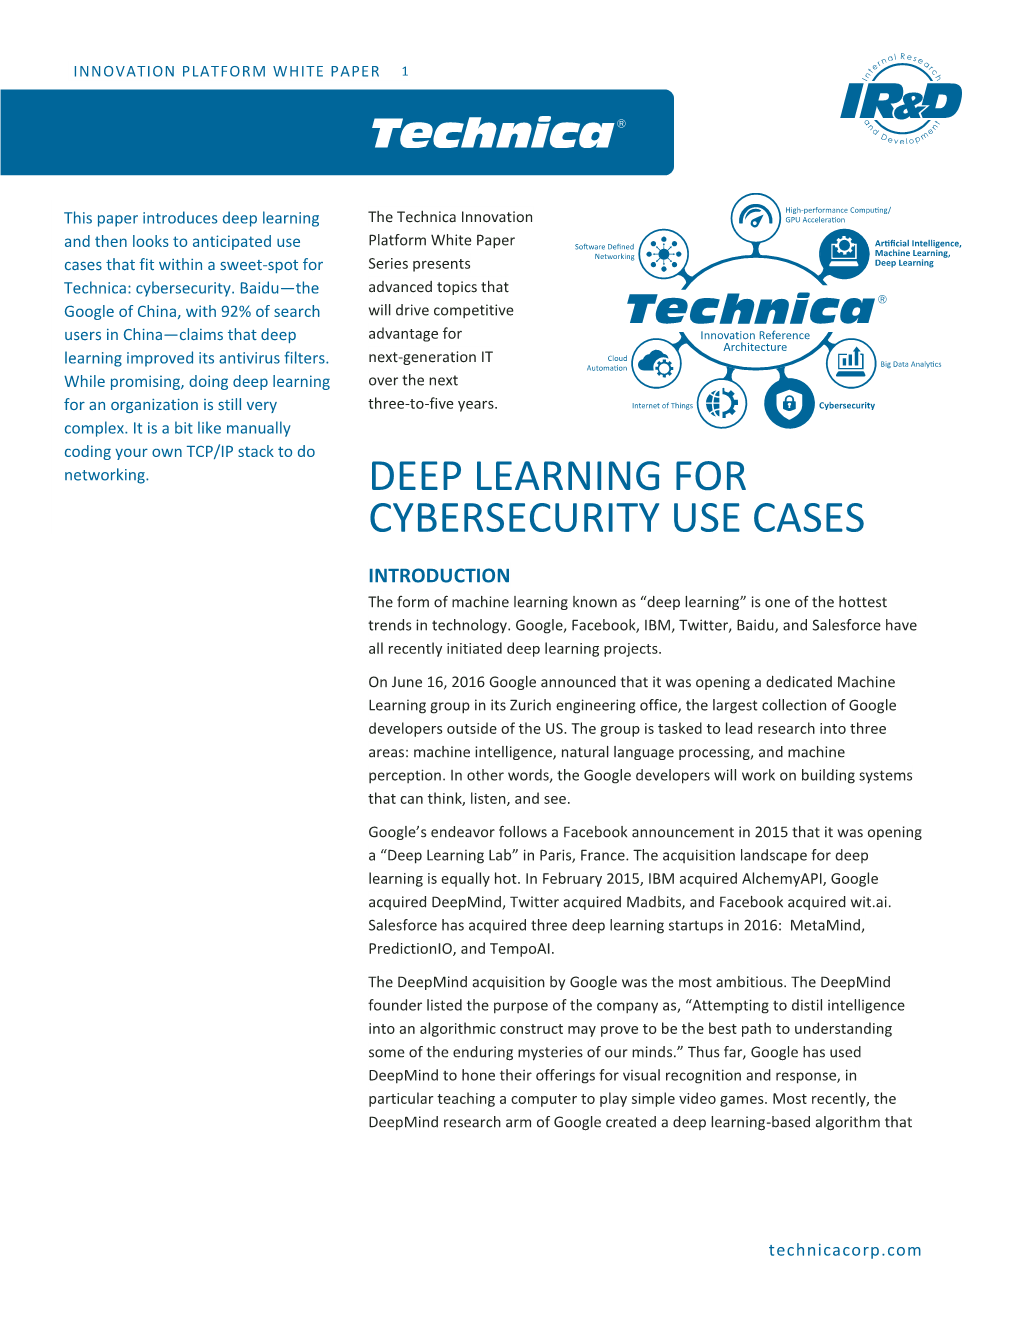 DEEP LEARNING for CYBERSECURITY USE CASES INTRODUCTION the Form of Machine Learning Known As “Deep Learning” Is One of the Hottest Trends in Technology